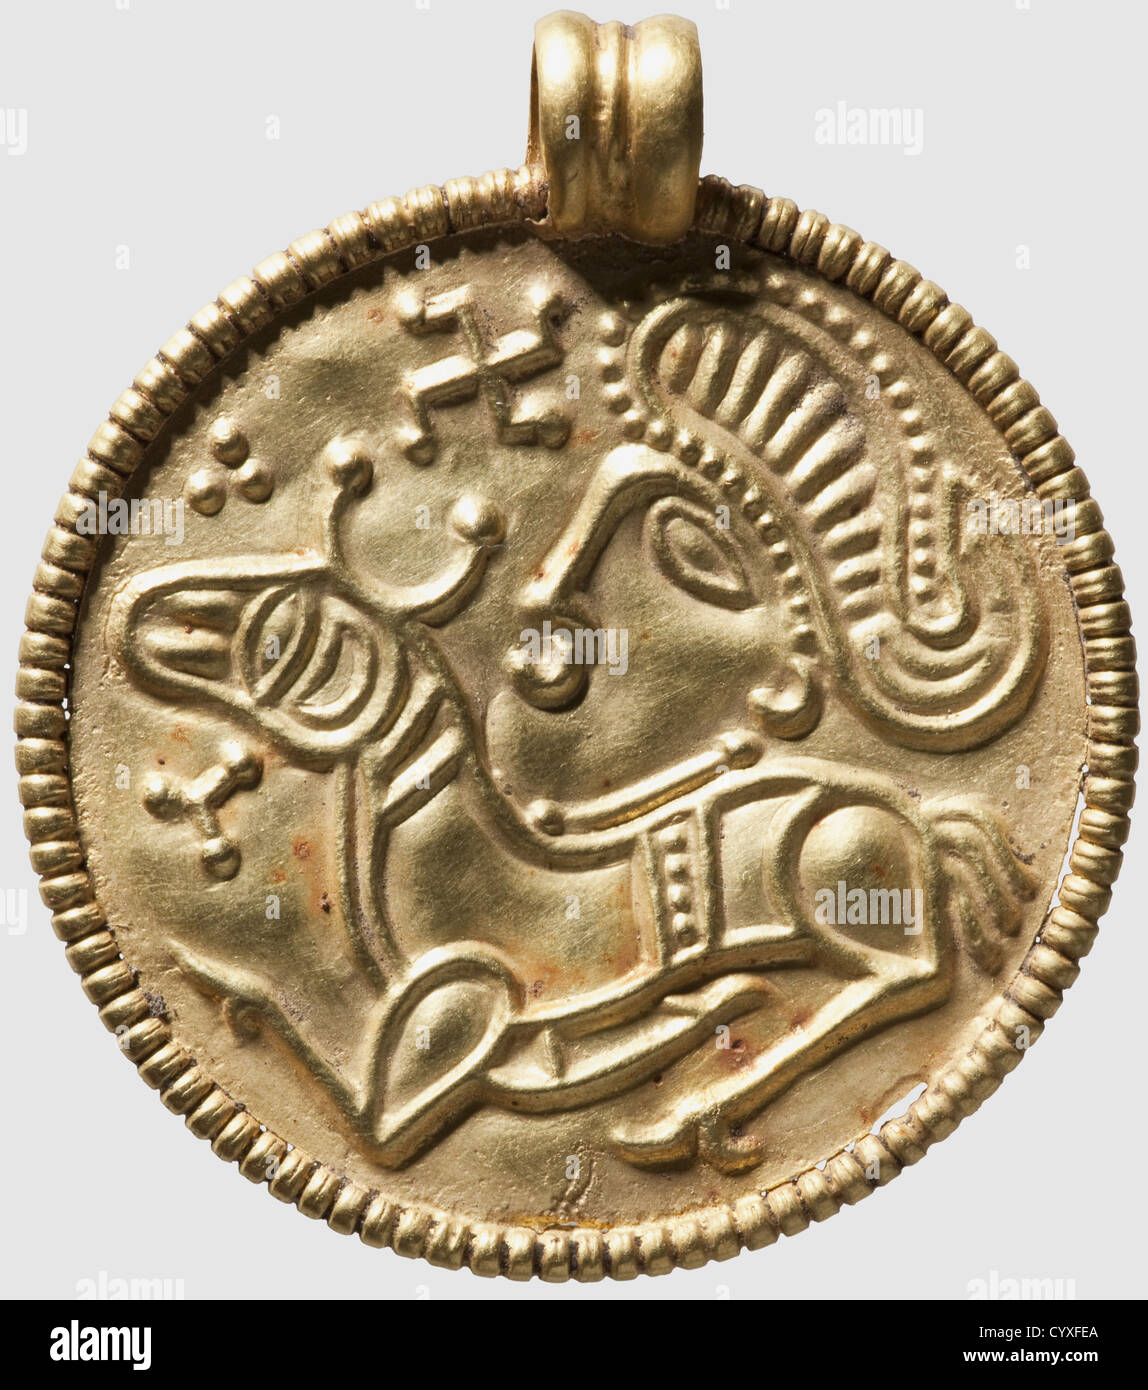 A North Germanic gold bracteate,5th/6th century AD. Disc-shaped pendant surrounded by a beaded edge. Image of Odin on horseback surmounted by a swastika symbol in repoussé. The top with soldered suspension loop. Diameter 32 mm,weight 5.9 g. Nordic bracteates were modelled after coins and were worn as jewellery and charms. There are numerous pieces known which bear motifs from Norse mythology. Precious metal analysis(gold content 91%)included. Provenance: German private collection,acquired in the 1960s,historic,historical,20th century,ancient world,anc,Additional-Rights-Clearences-Not Available Stock Photo